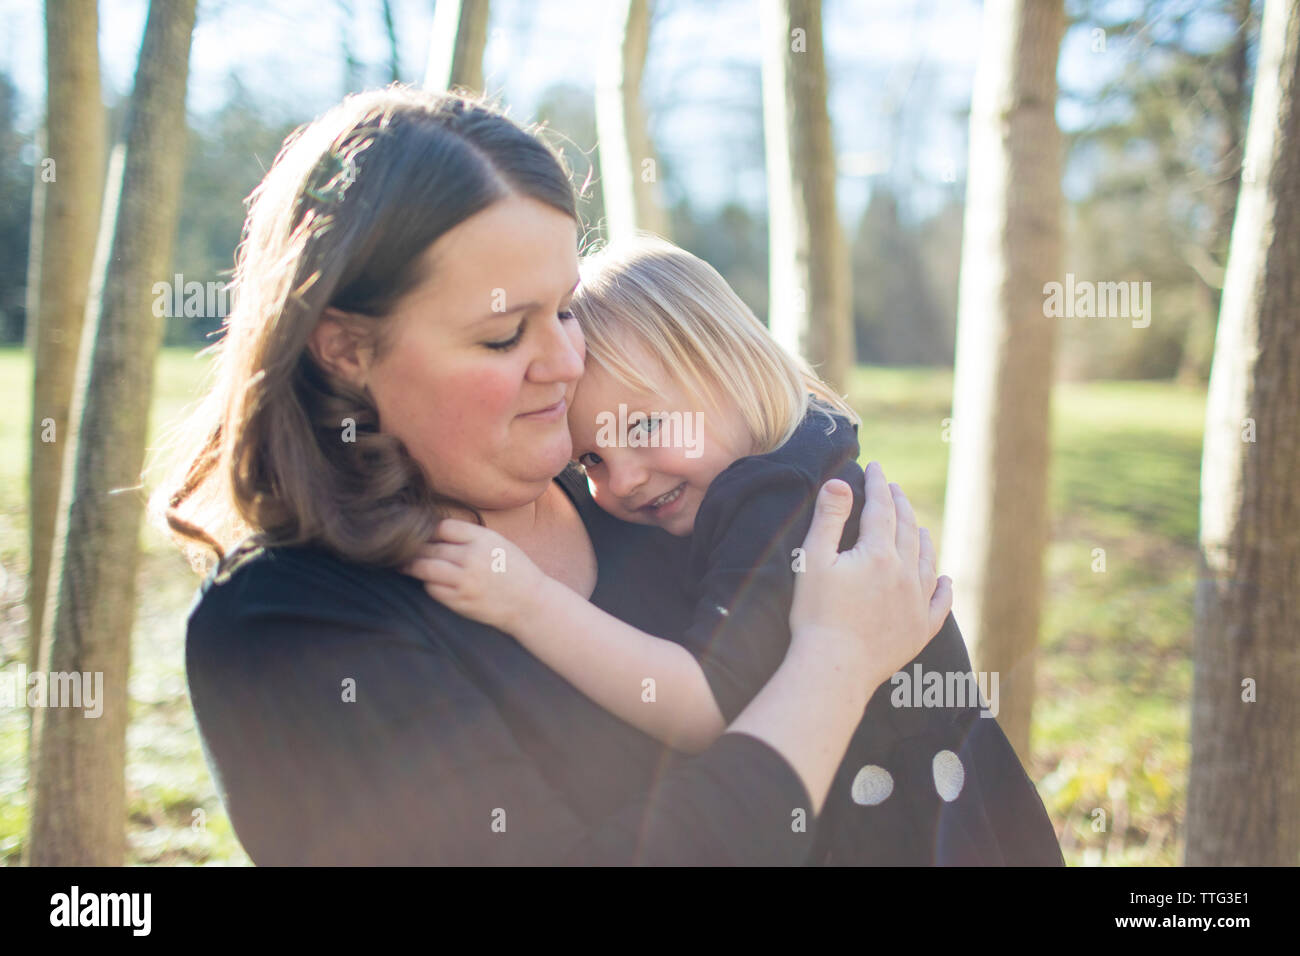 mother holding daughter at nature park. Stock Photo